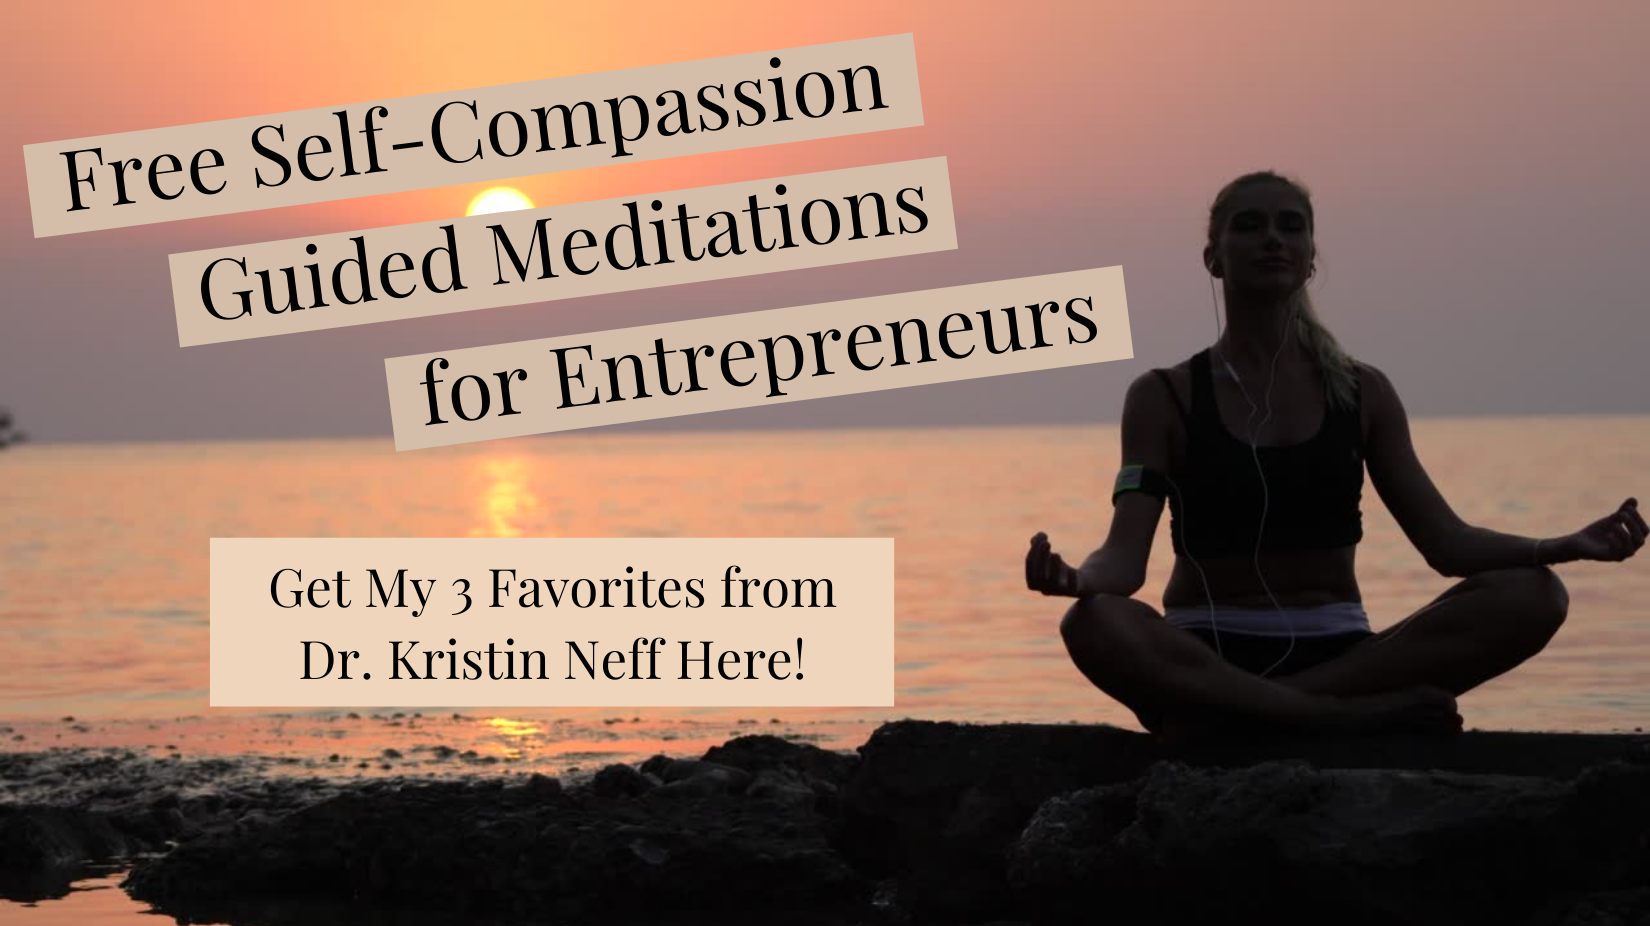 Self-Compassion for Business Success as an Entrepreneur with Dr. Kristin Neff